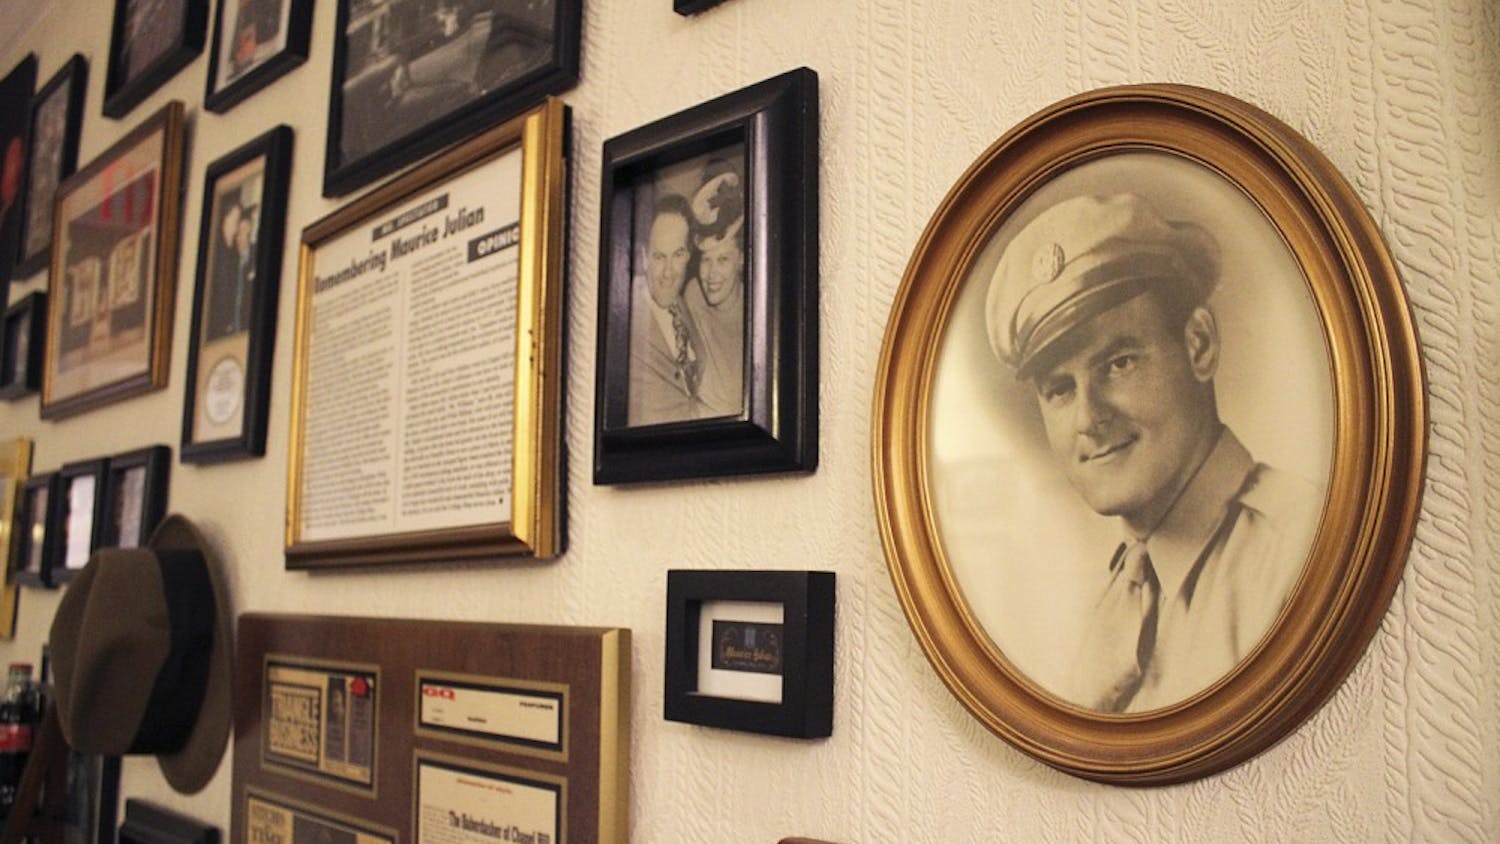 Photos and articles commemorating business leader Maurice Julian (right) and his family hang on the back wall in Julian’s on Franklin Steet.